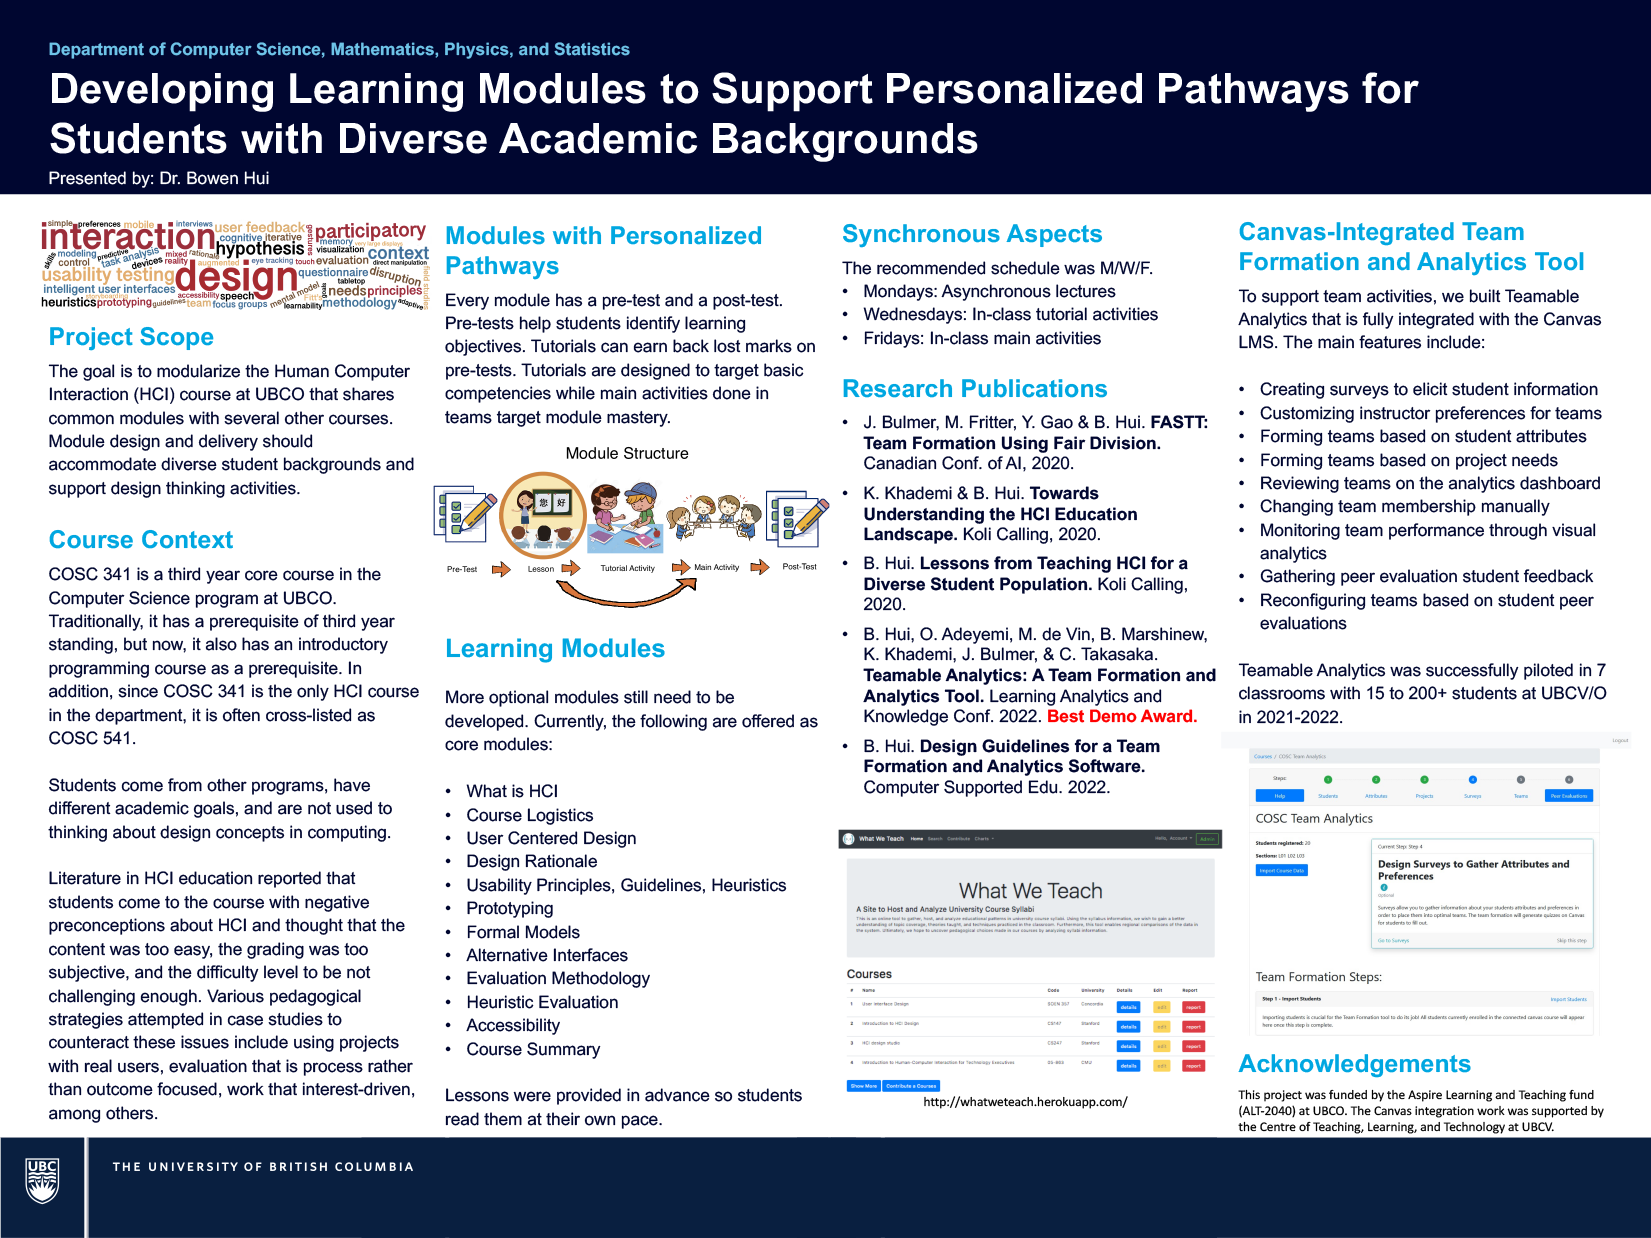 Academic poster describing the project scope, course context, project details and publications